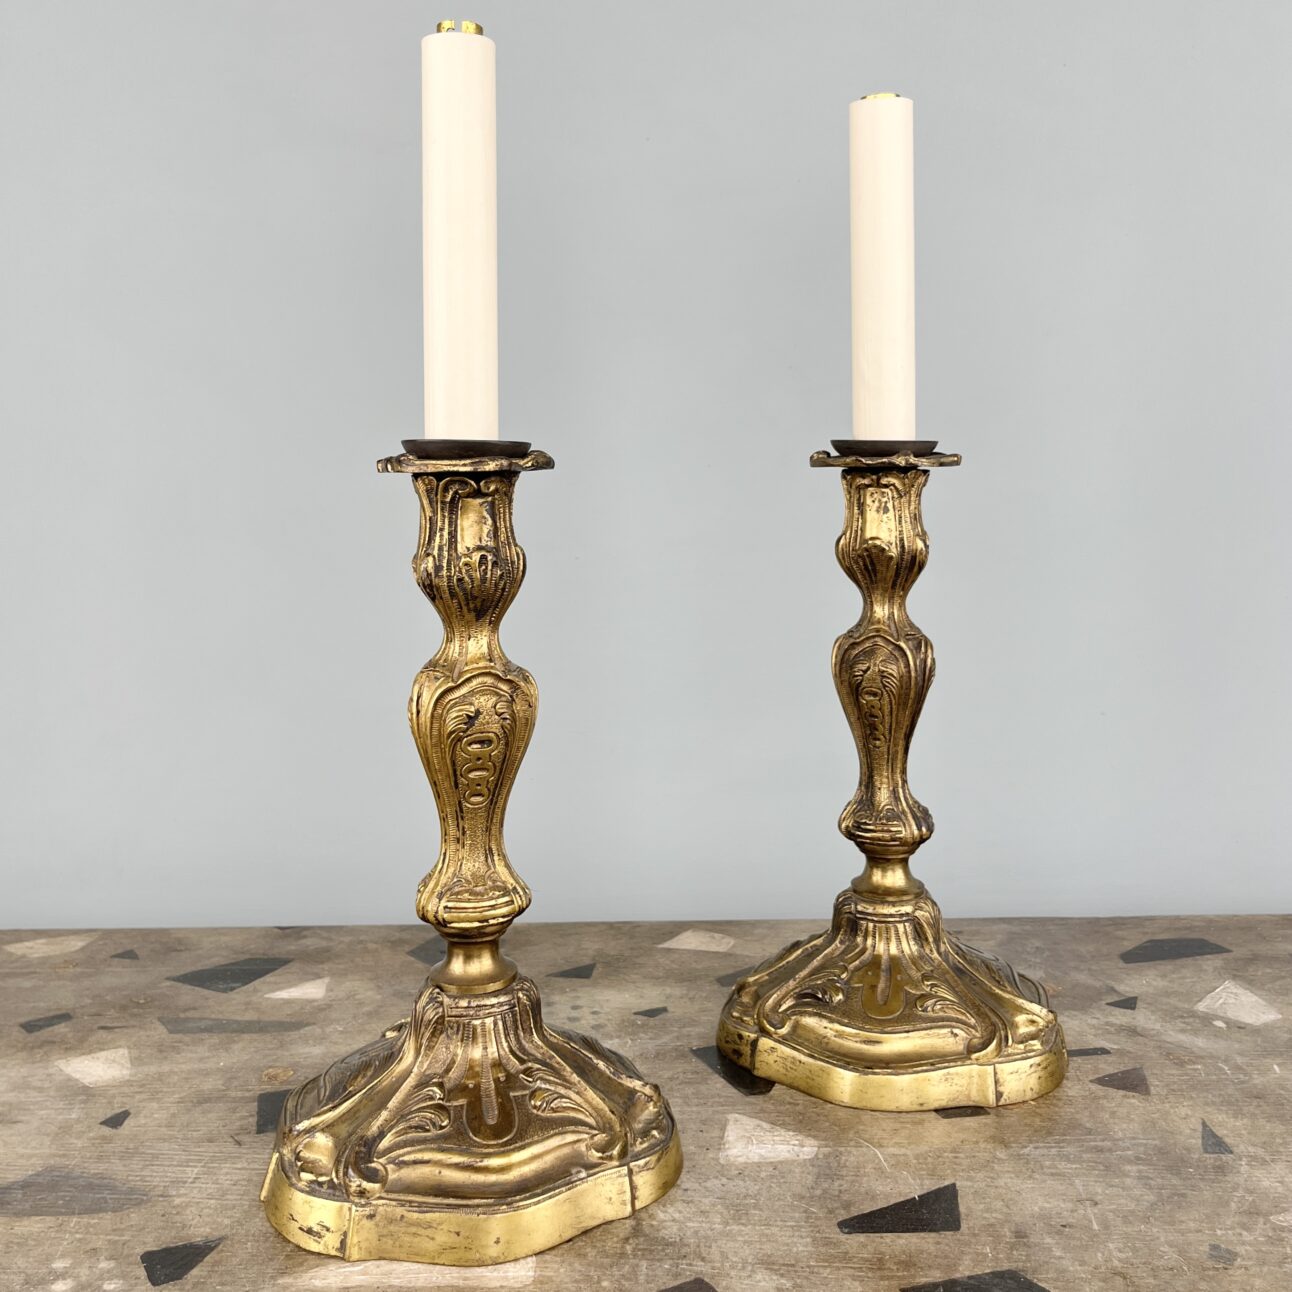 Pair of Louis XV Style Gilt-Bronze Candlestick Lamps